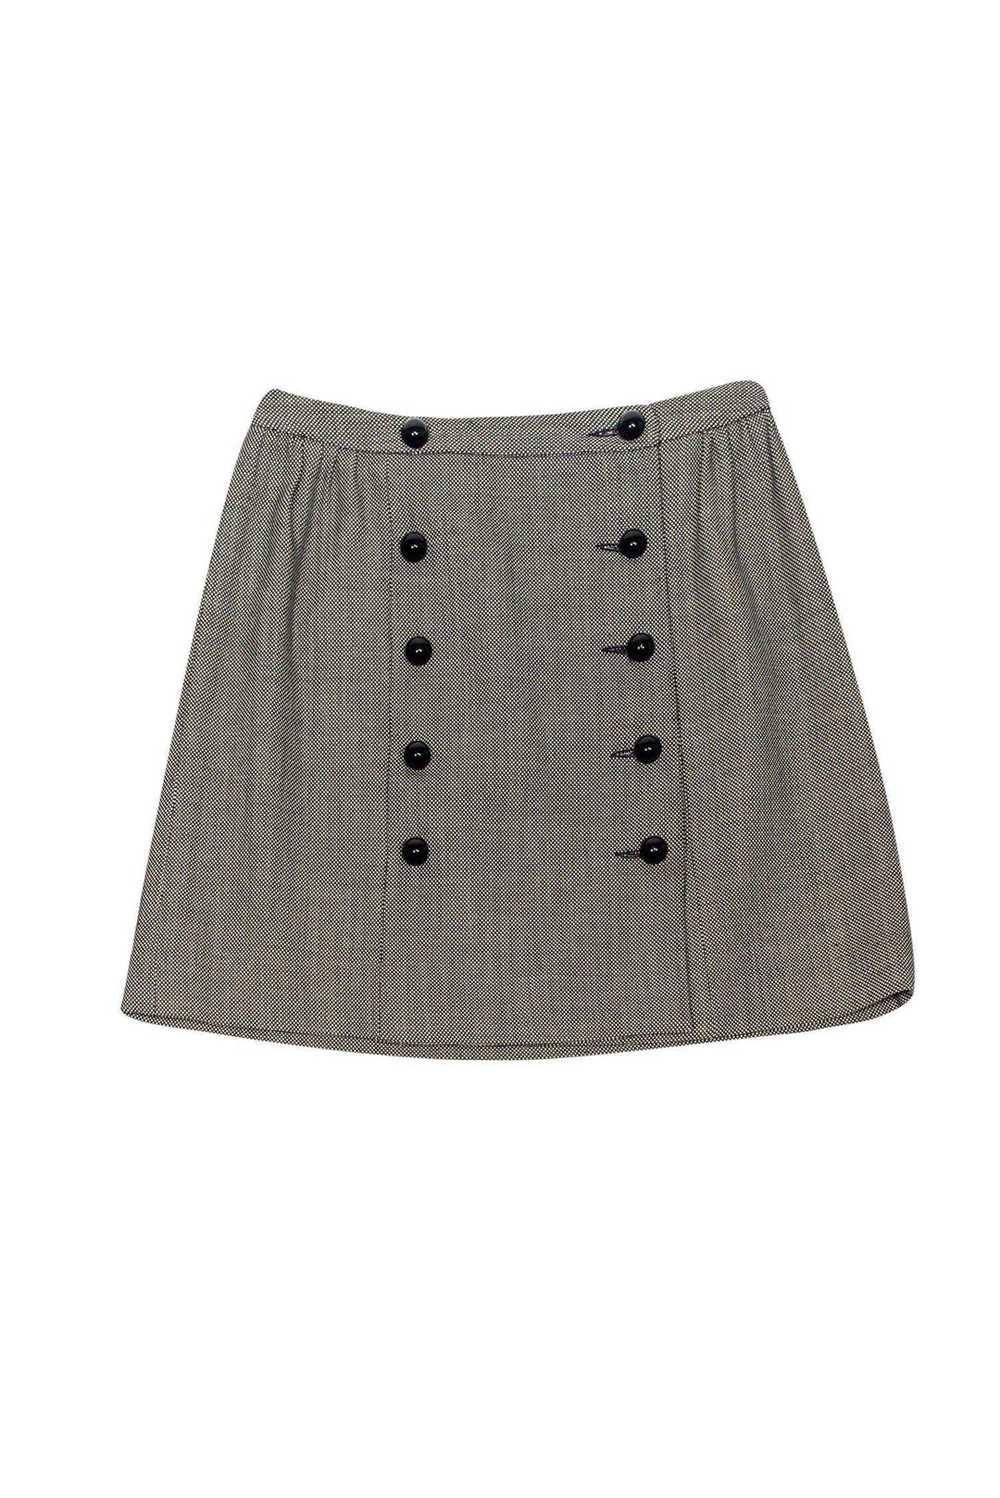 Milly - Black & White Skirt w/ Oversized Buttons … - image 2